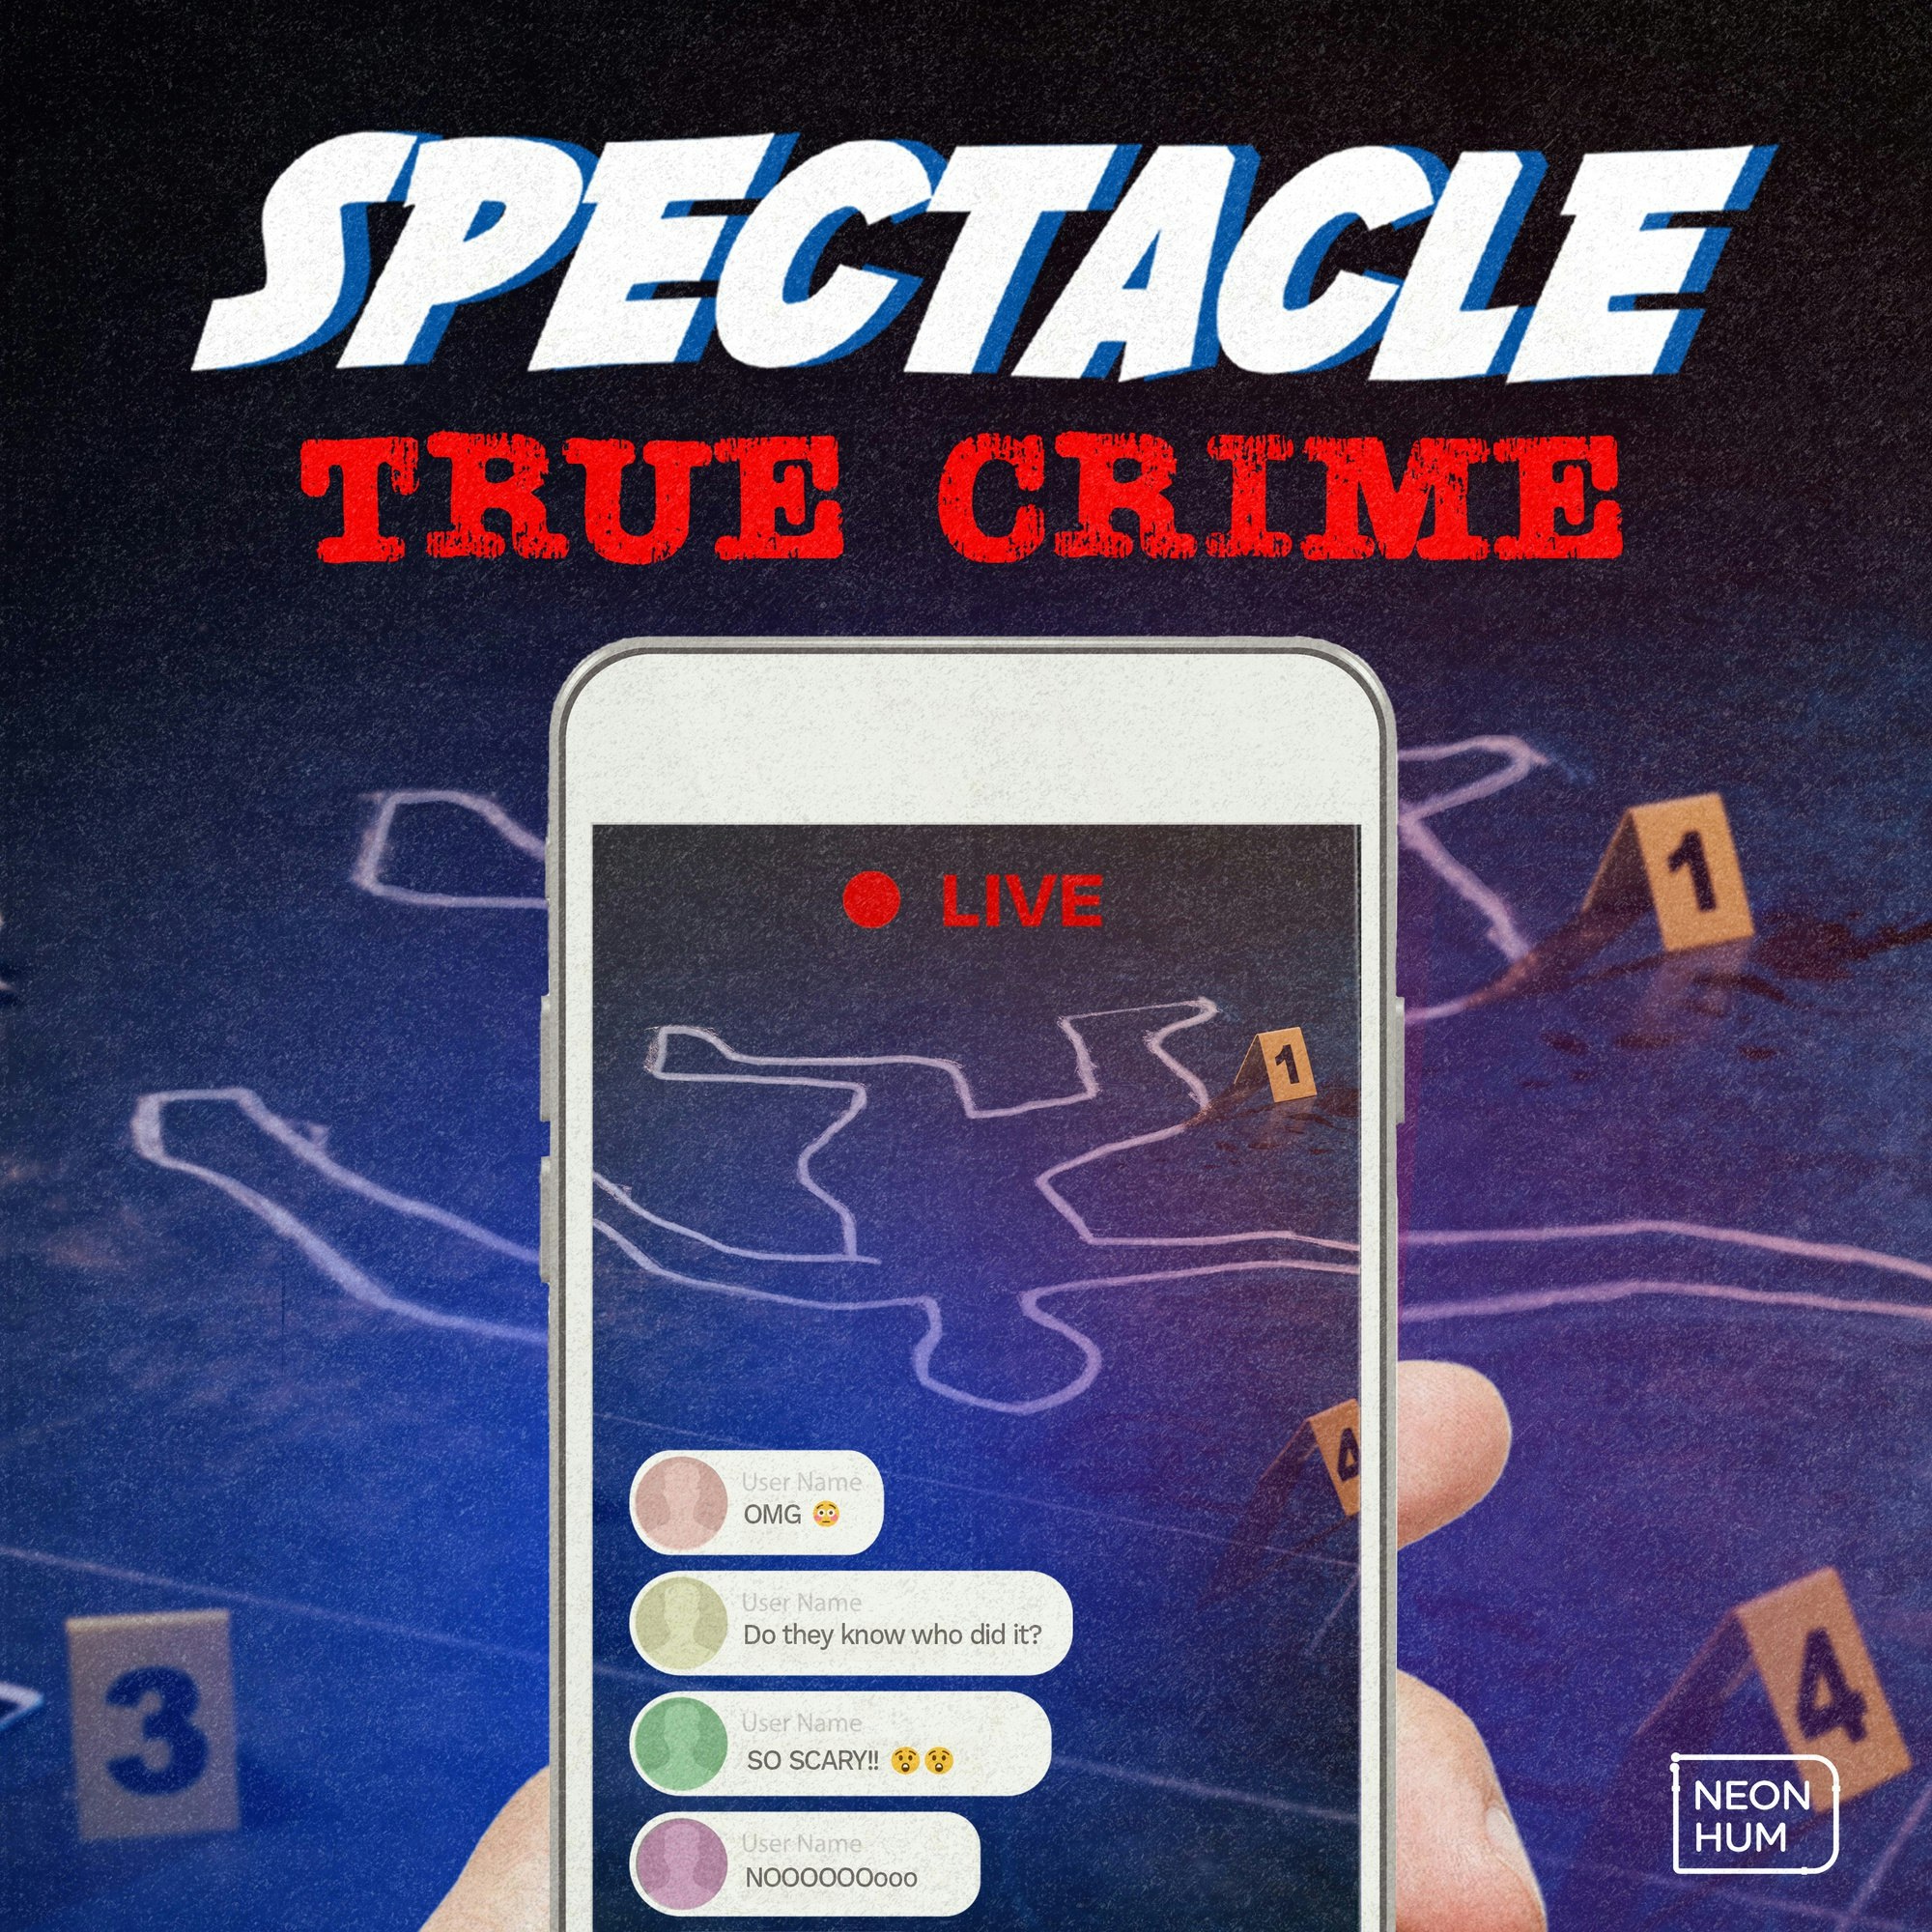 Spectacle: True Crime podcast